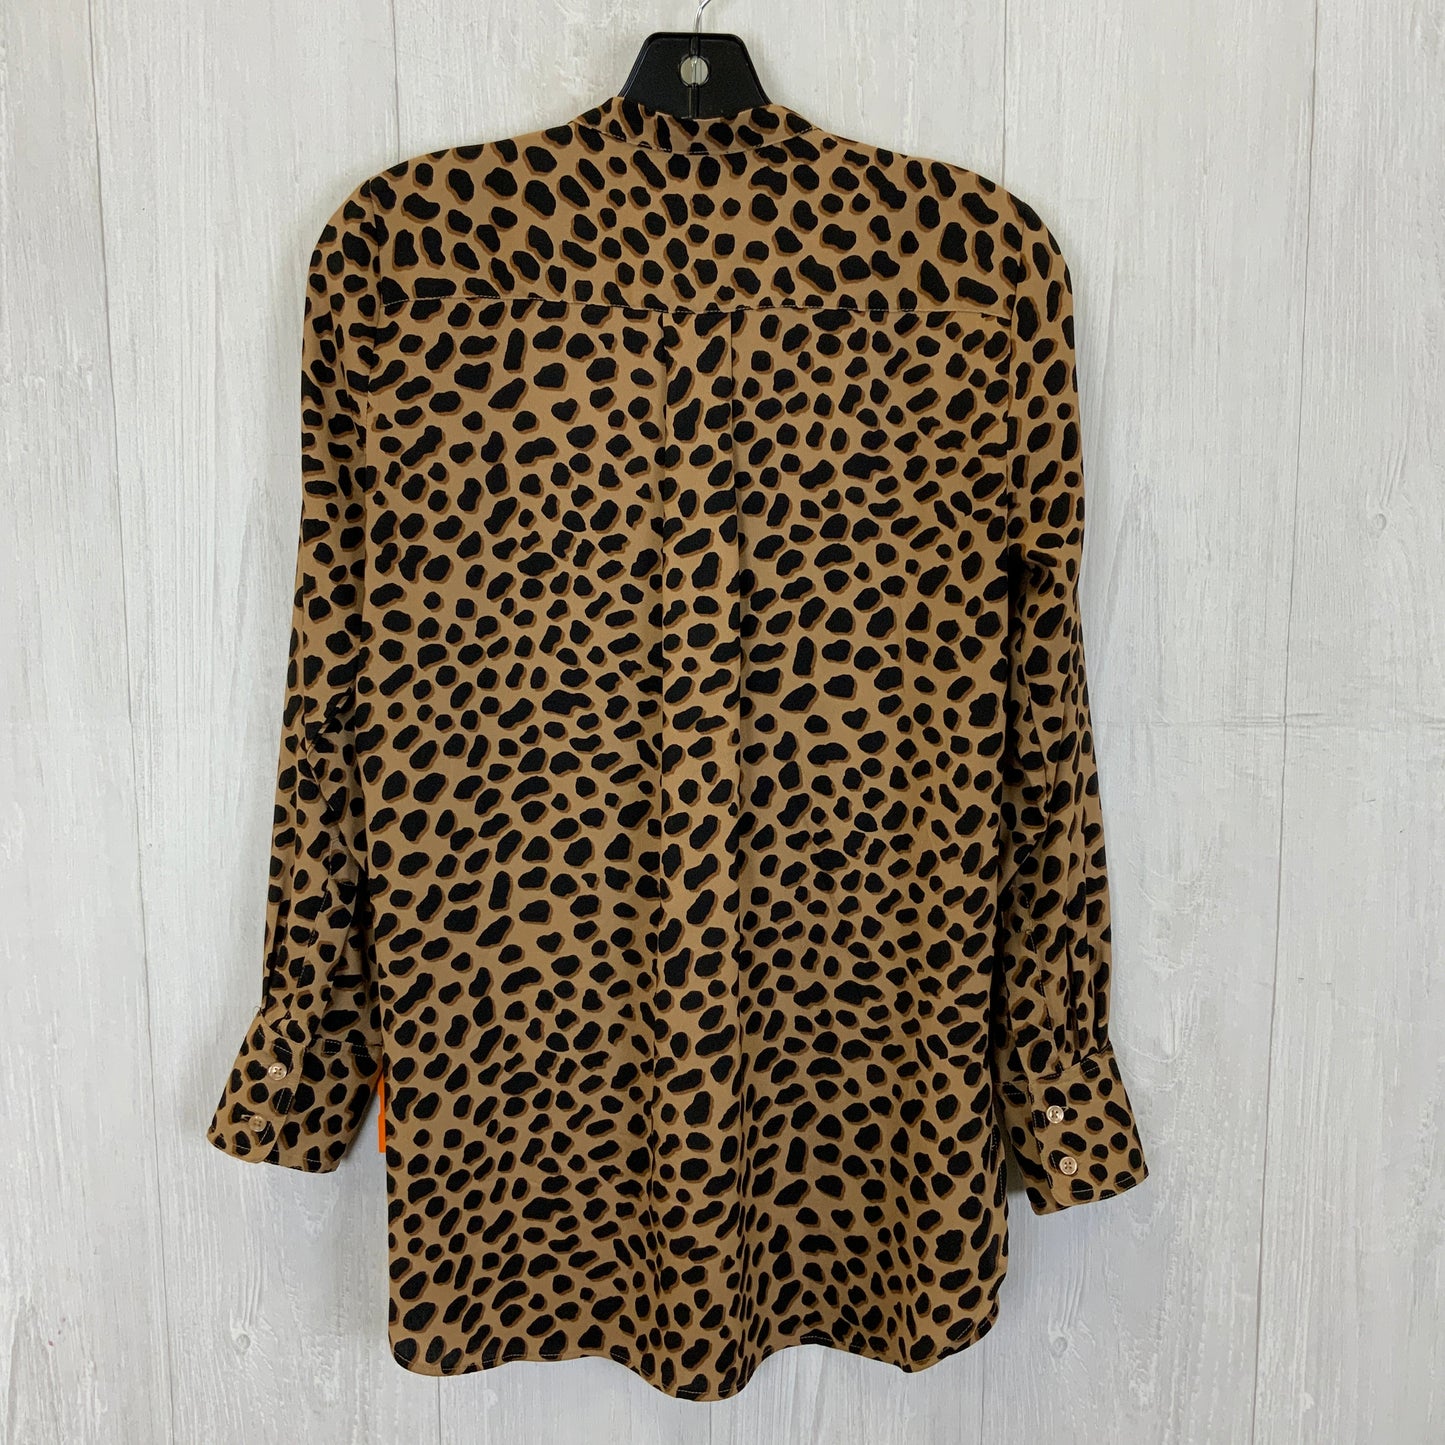 Blouse Long Sleeve By Ann Taylor  Size: Petite   Small